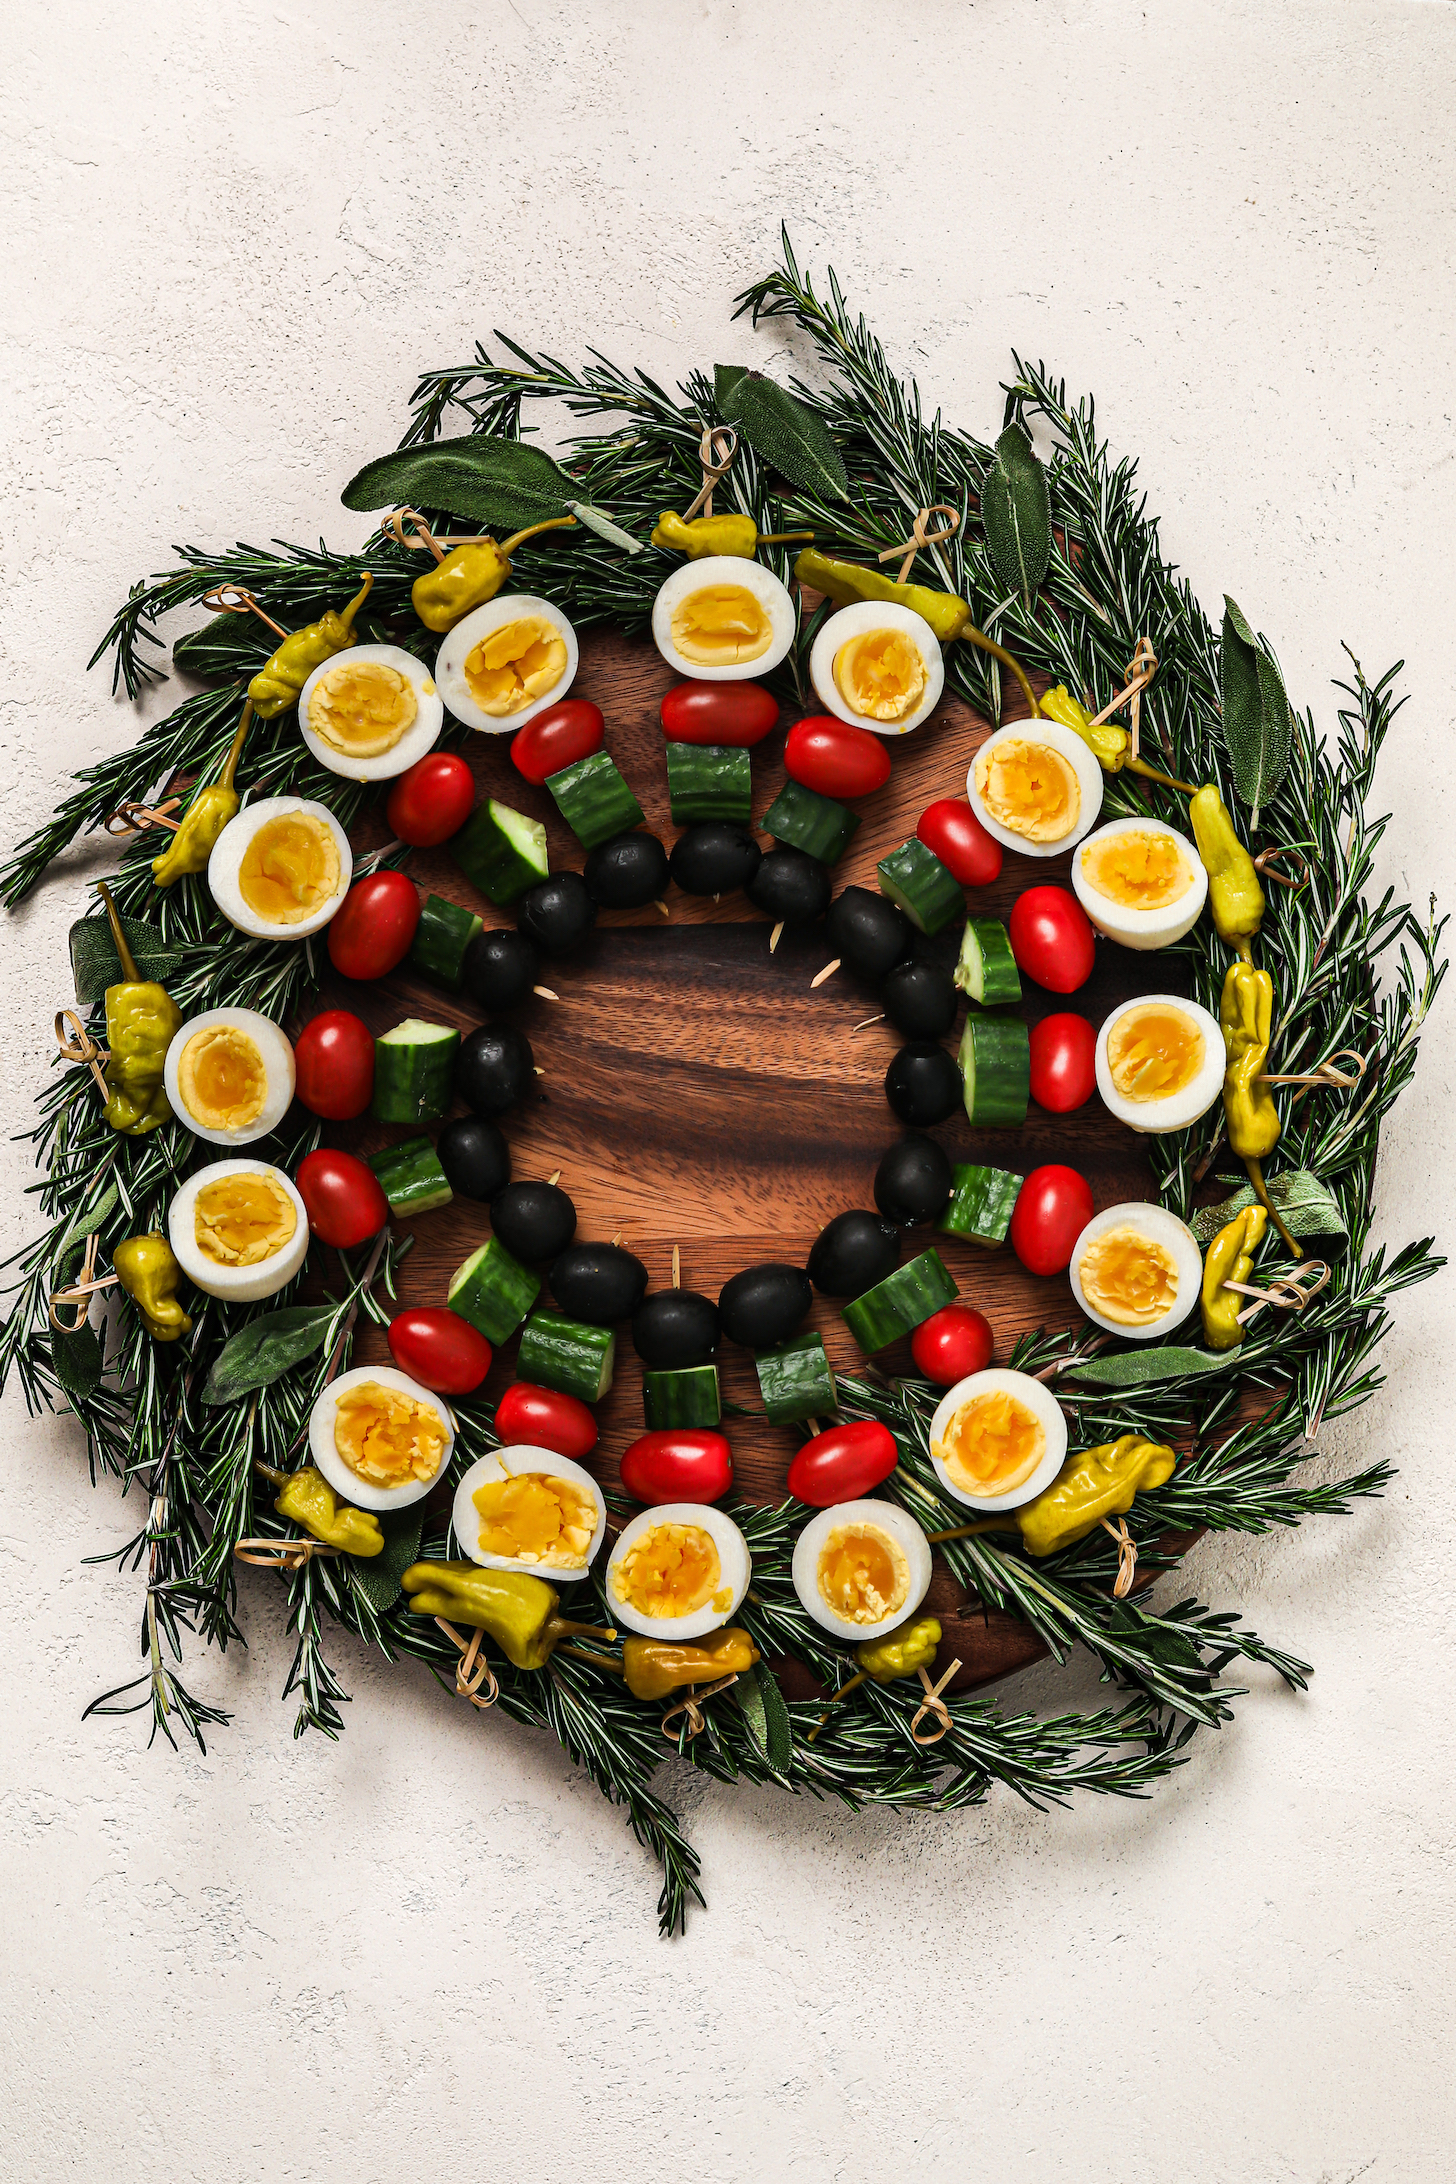 Colourful and festive wreath of wooden picks threaded with boil egg halves, veggies and chilli peppers on a bed of rosemary and sage.